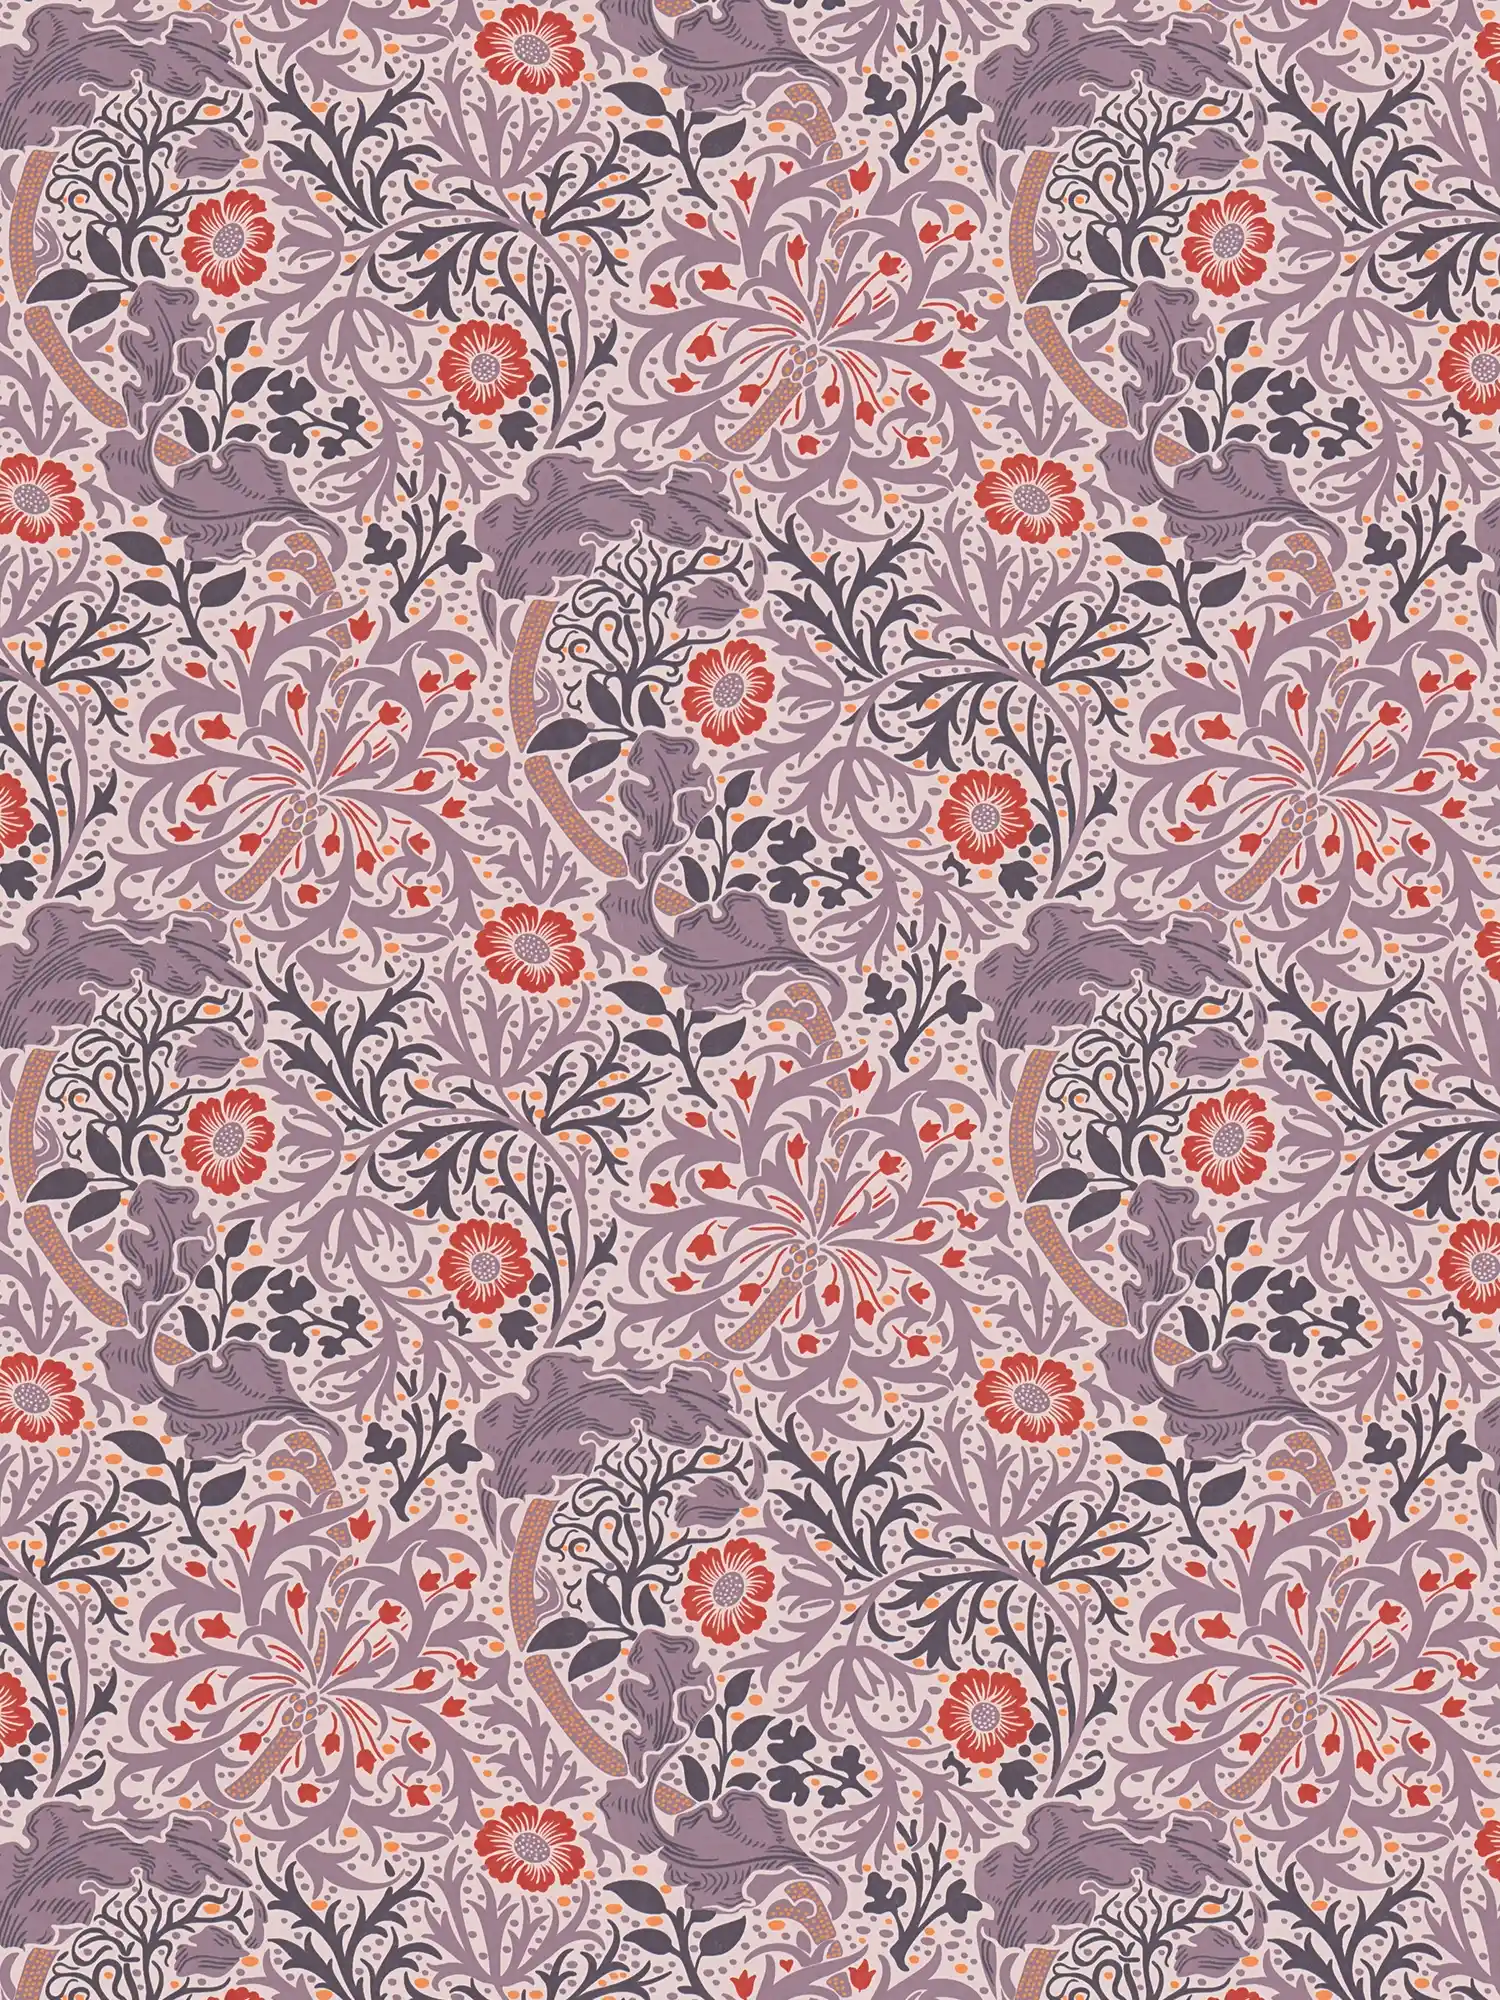 Floral non-woven wallpaper leaves, vines & flowers dotted - purple , red, orange
